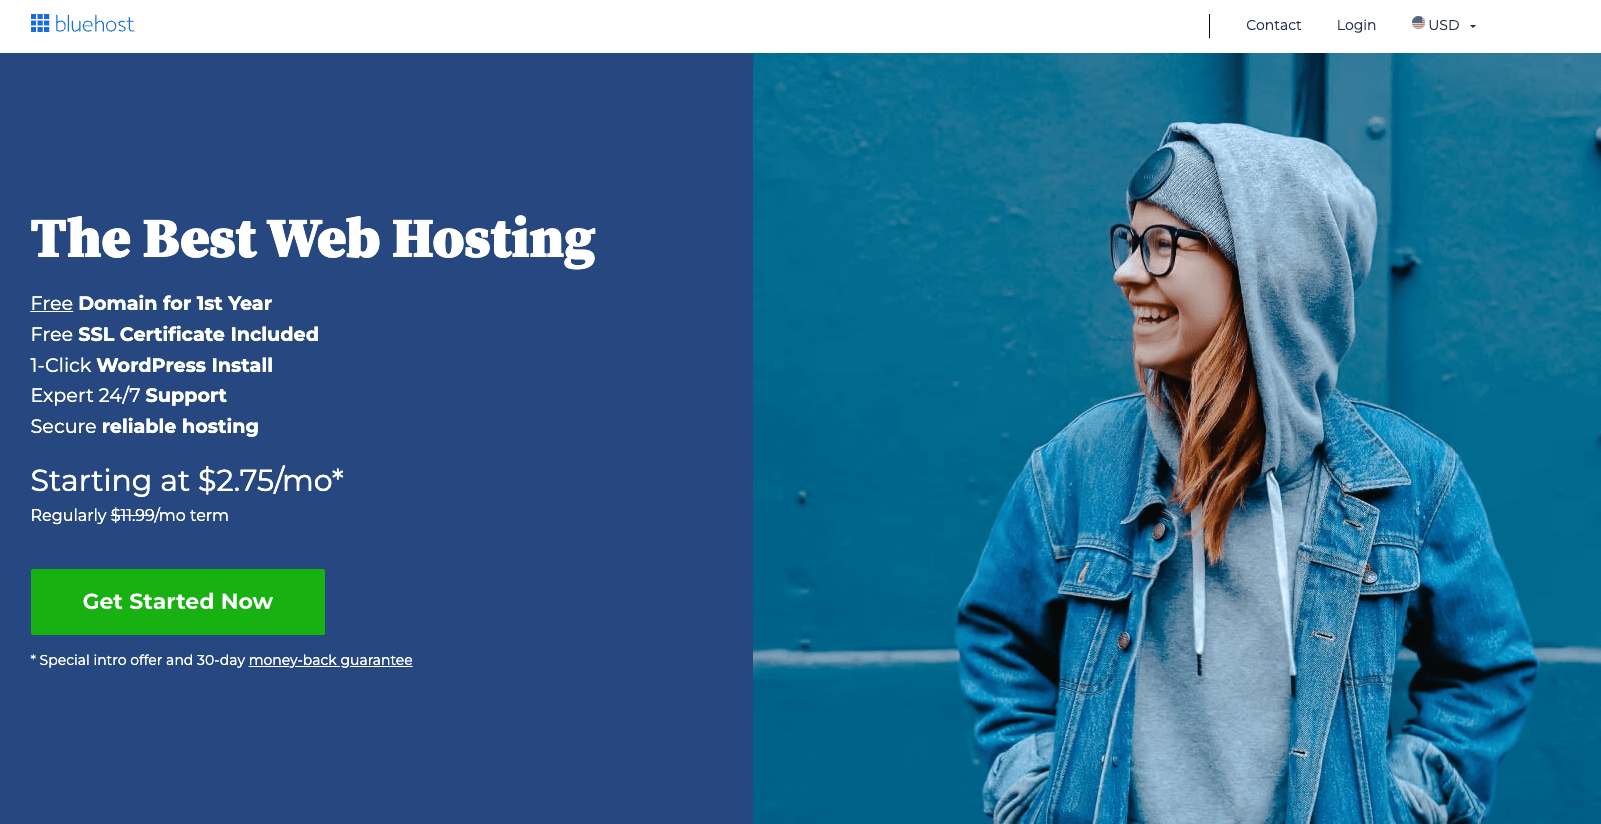 Bluehost homepage.